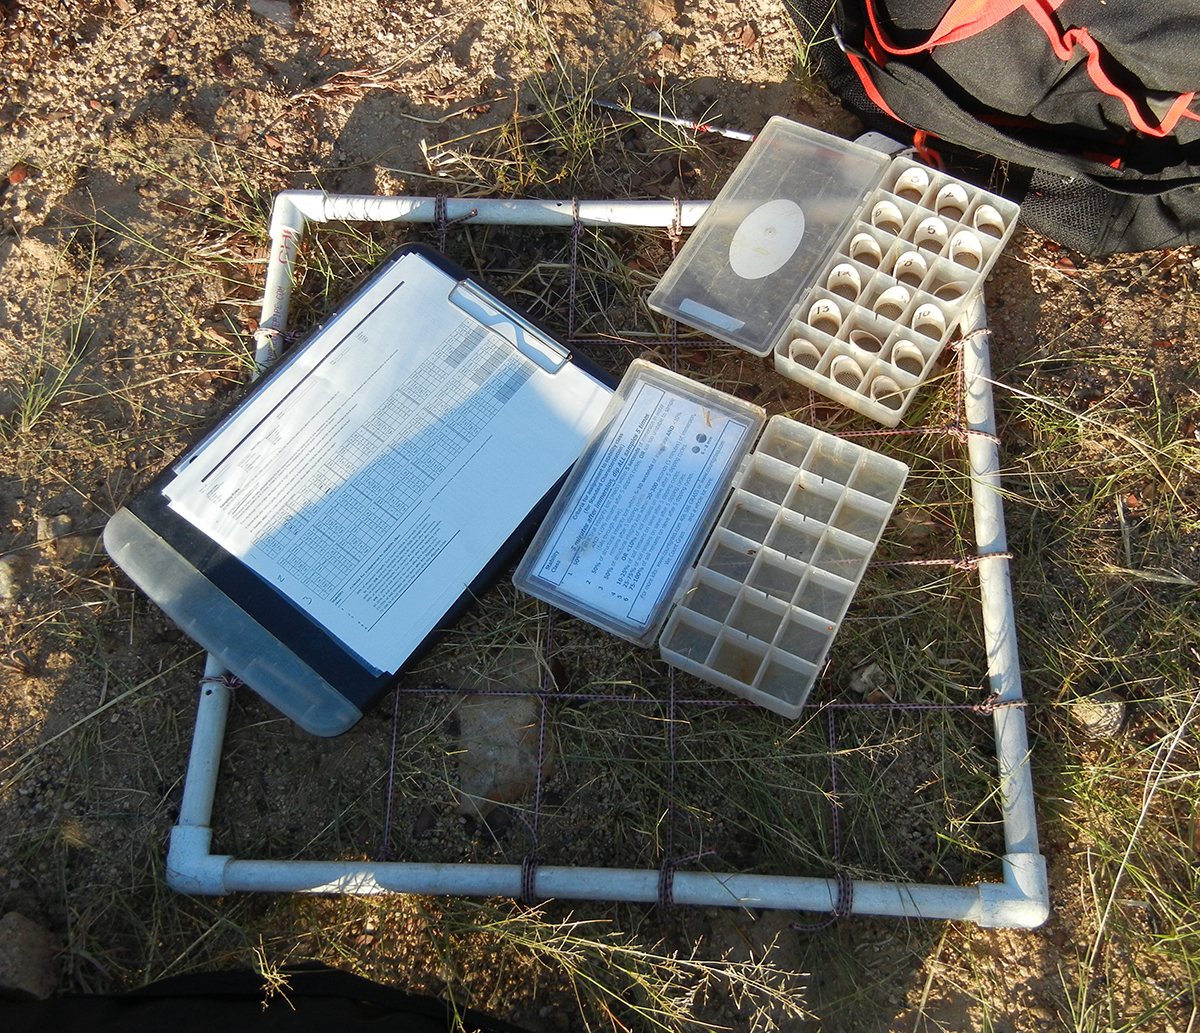 PVC quadrat, clipboard and forms, and two segmented plastic boxes. One of the boxes contains 18 plastic ovals with screens, some filled with soil.